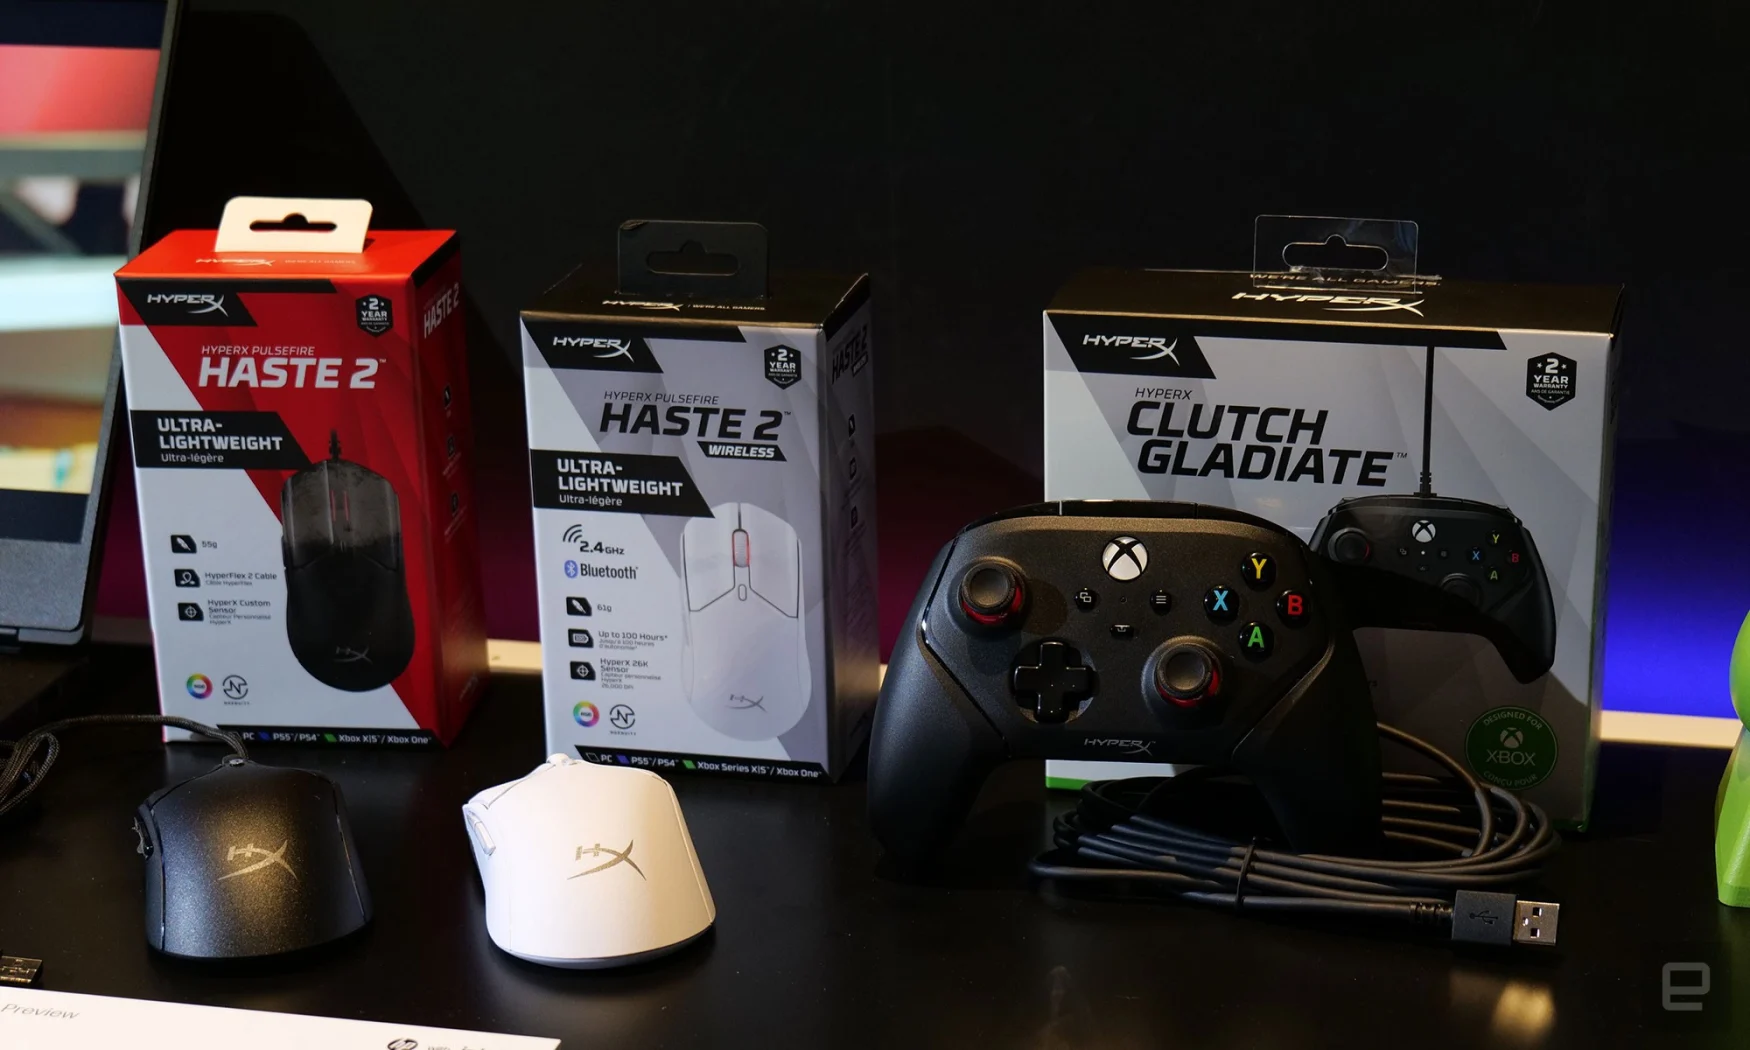 In terms of more traditional products, at CES 2023 HyperX is launching wired and wireless versions of its Pulsefire Haste 2 mouse and its first officially-licensed Xbox controller in the Clutch Gladiate. 